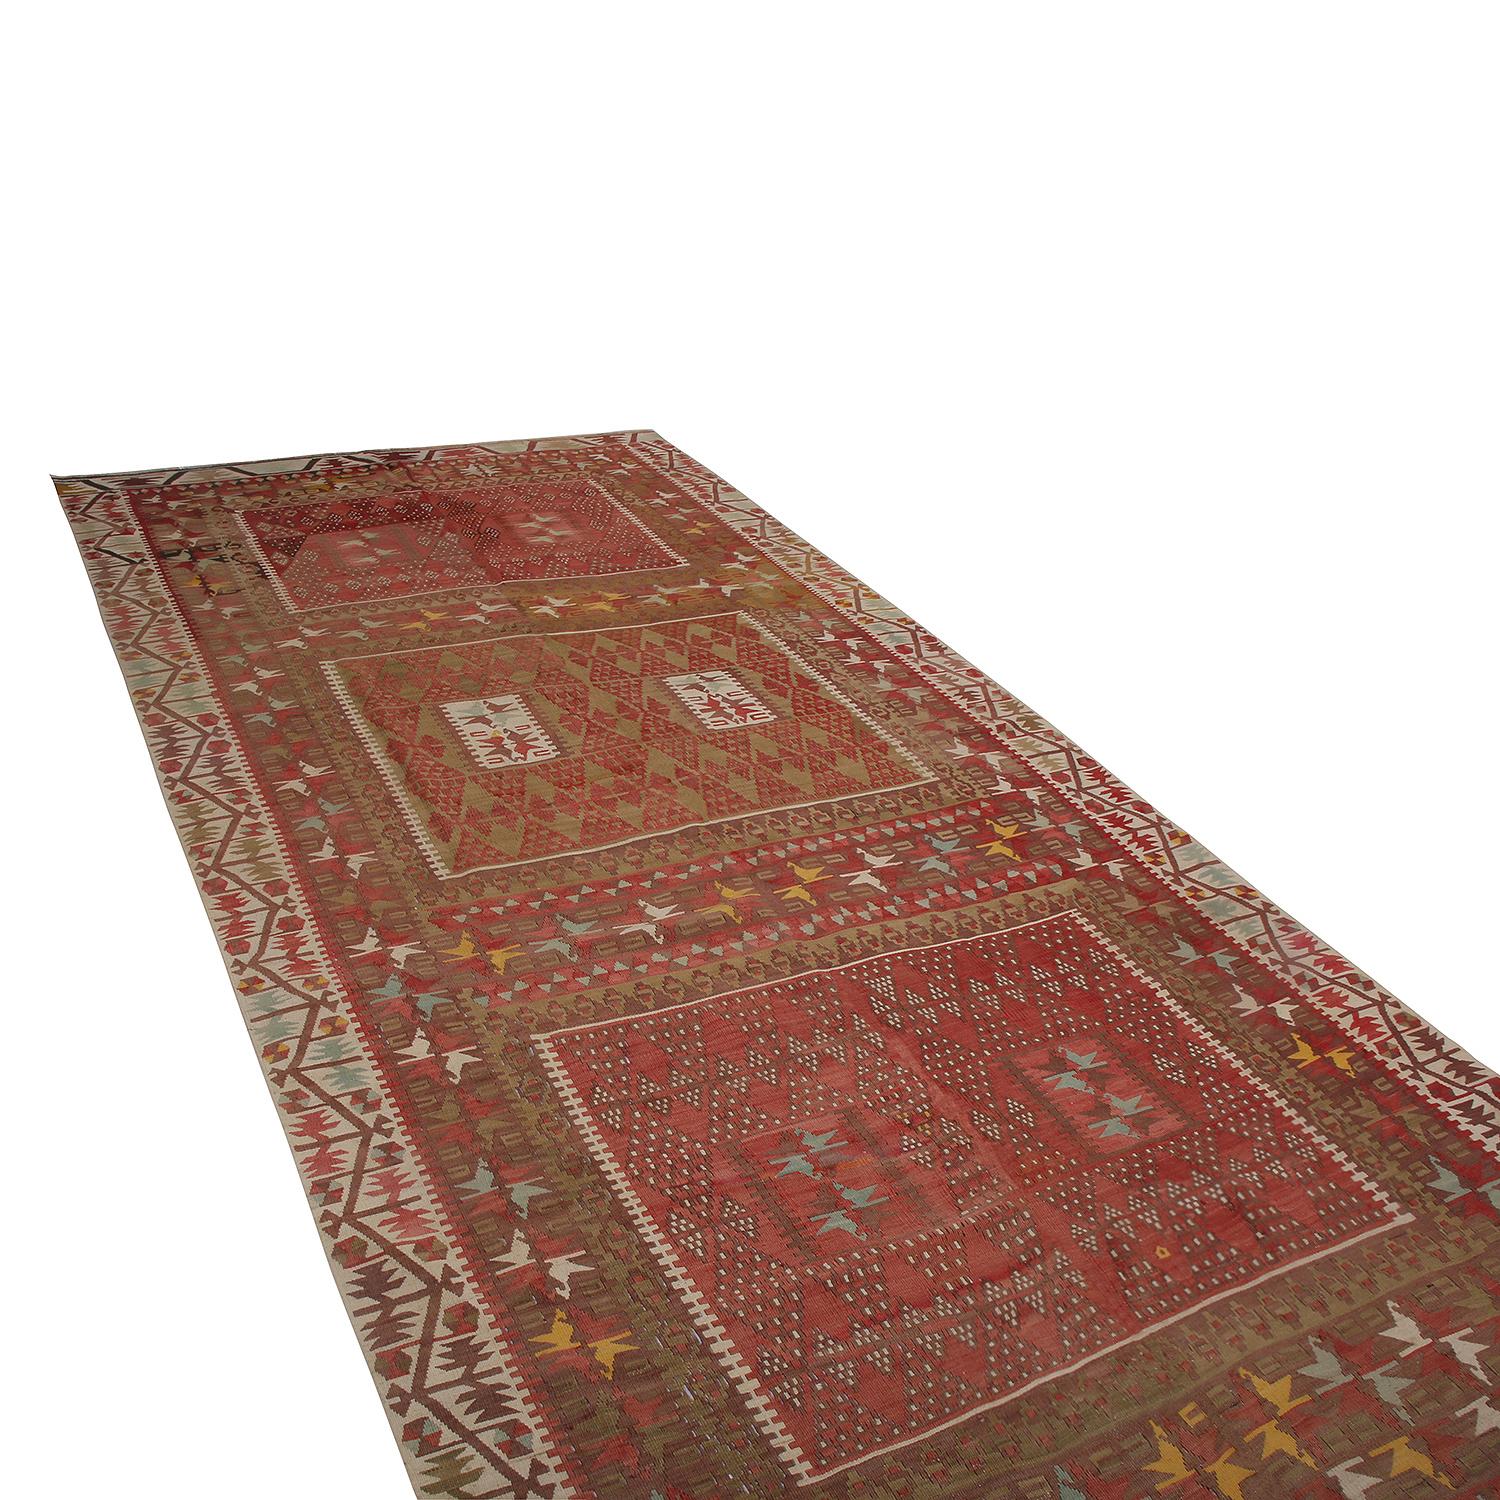 Handwoven in Turkey originating between 1950-1960, this vintage midcentury 5 x 11 wool Kilim hails from the city of Kayseri, local to Central Anatolia with the inspiration for the Classic traditional red and beige-brown colorway this piece enjoys.